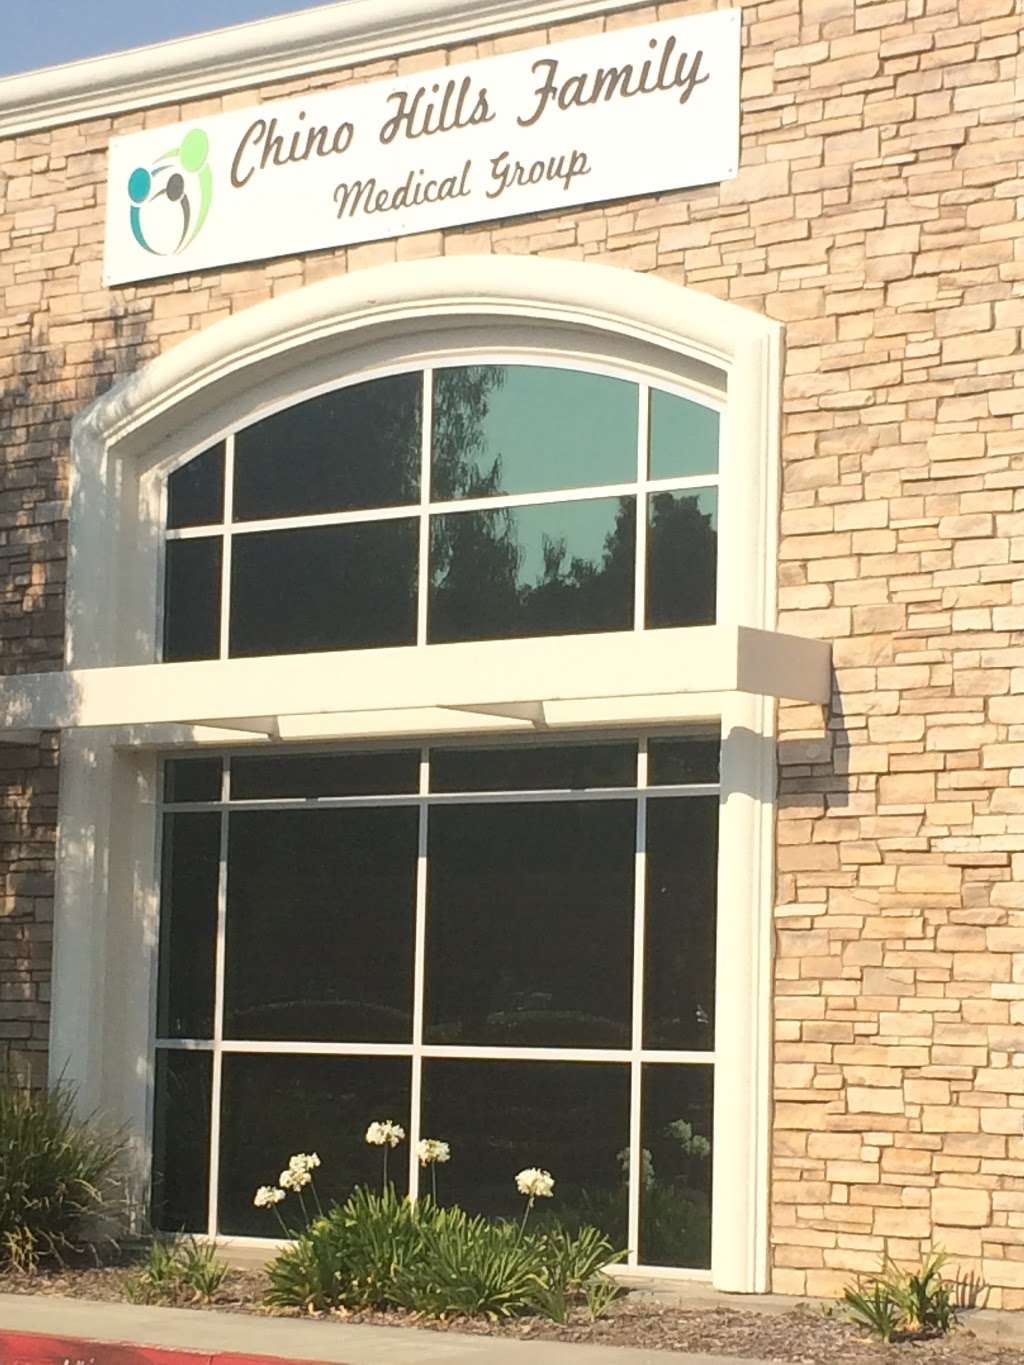 Chino Hills Family Medical Group | 15361 Central Ave, Chino, CA 91710 | Phone: (909) 393-7171